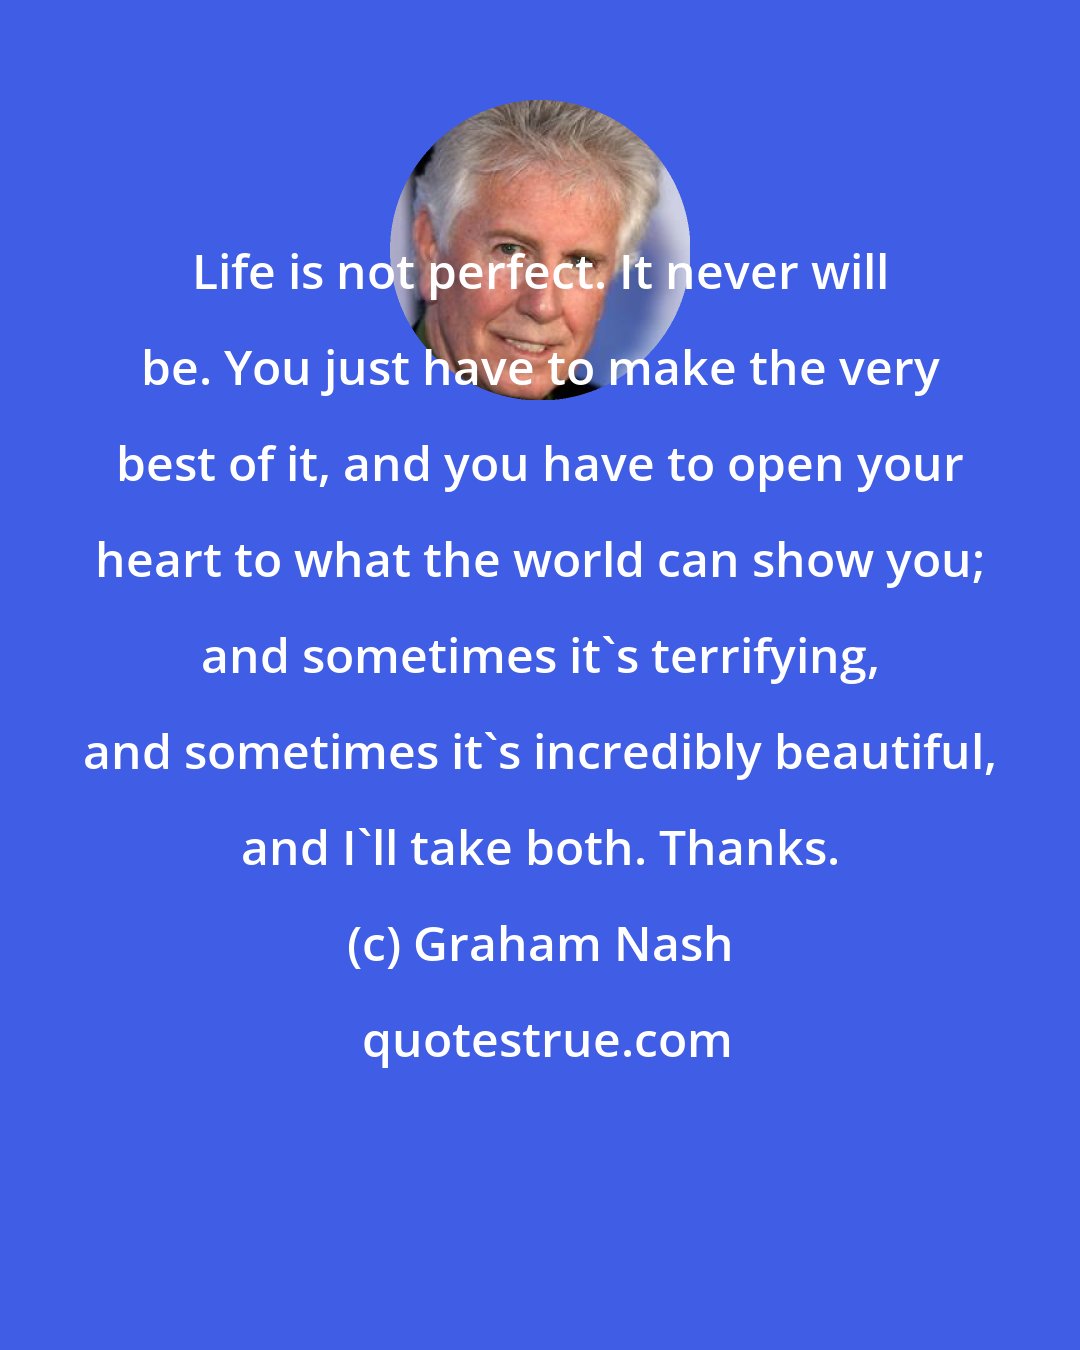 Graham Nash: Life is not perfect. It never will be. You just have to make the very best of it, and you have to open your heart to what the world can show you; and sometimes it's terrifying, and sometimes it's incredibly beautiful, and I'll take both. Thanks.